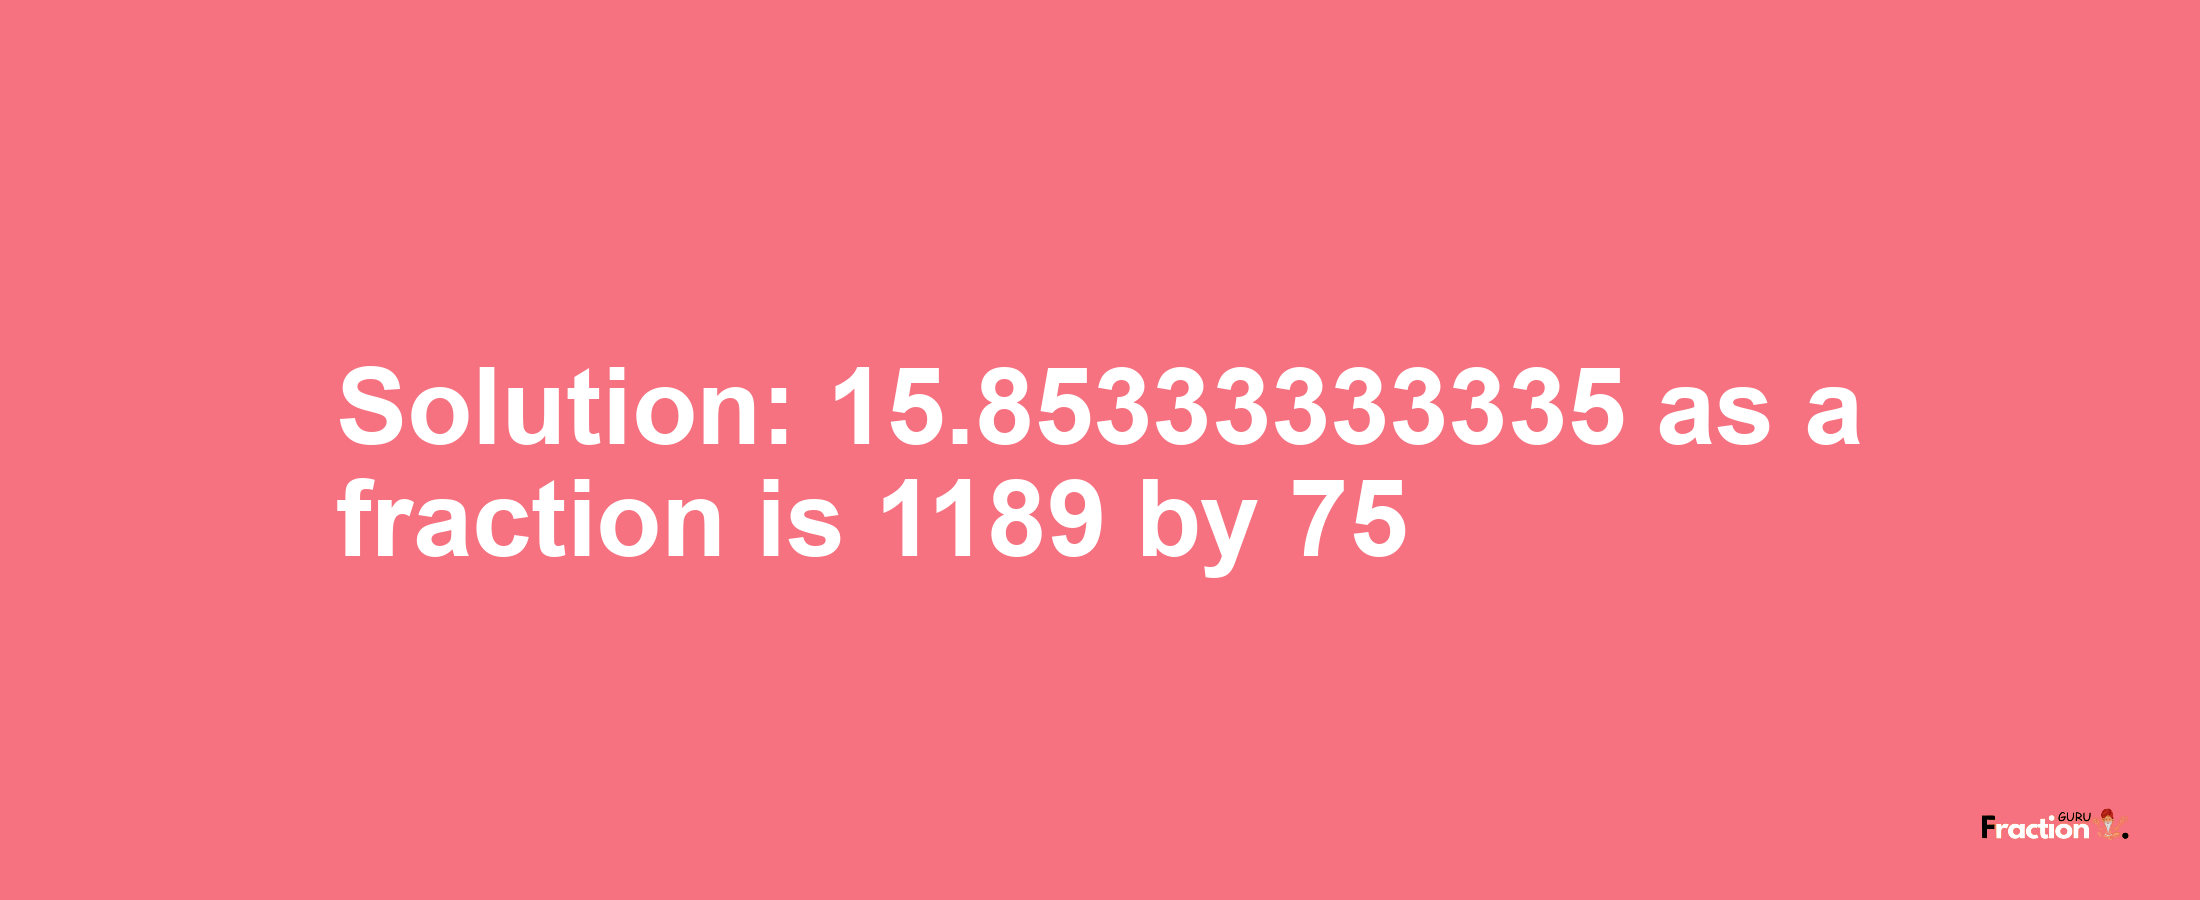 Solution:15.85333333335 as a fraction is 1189/75